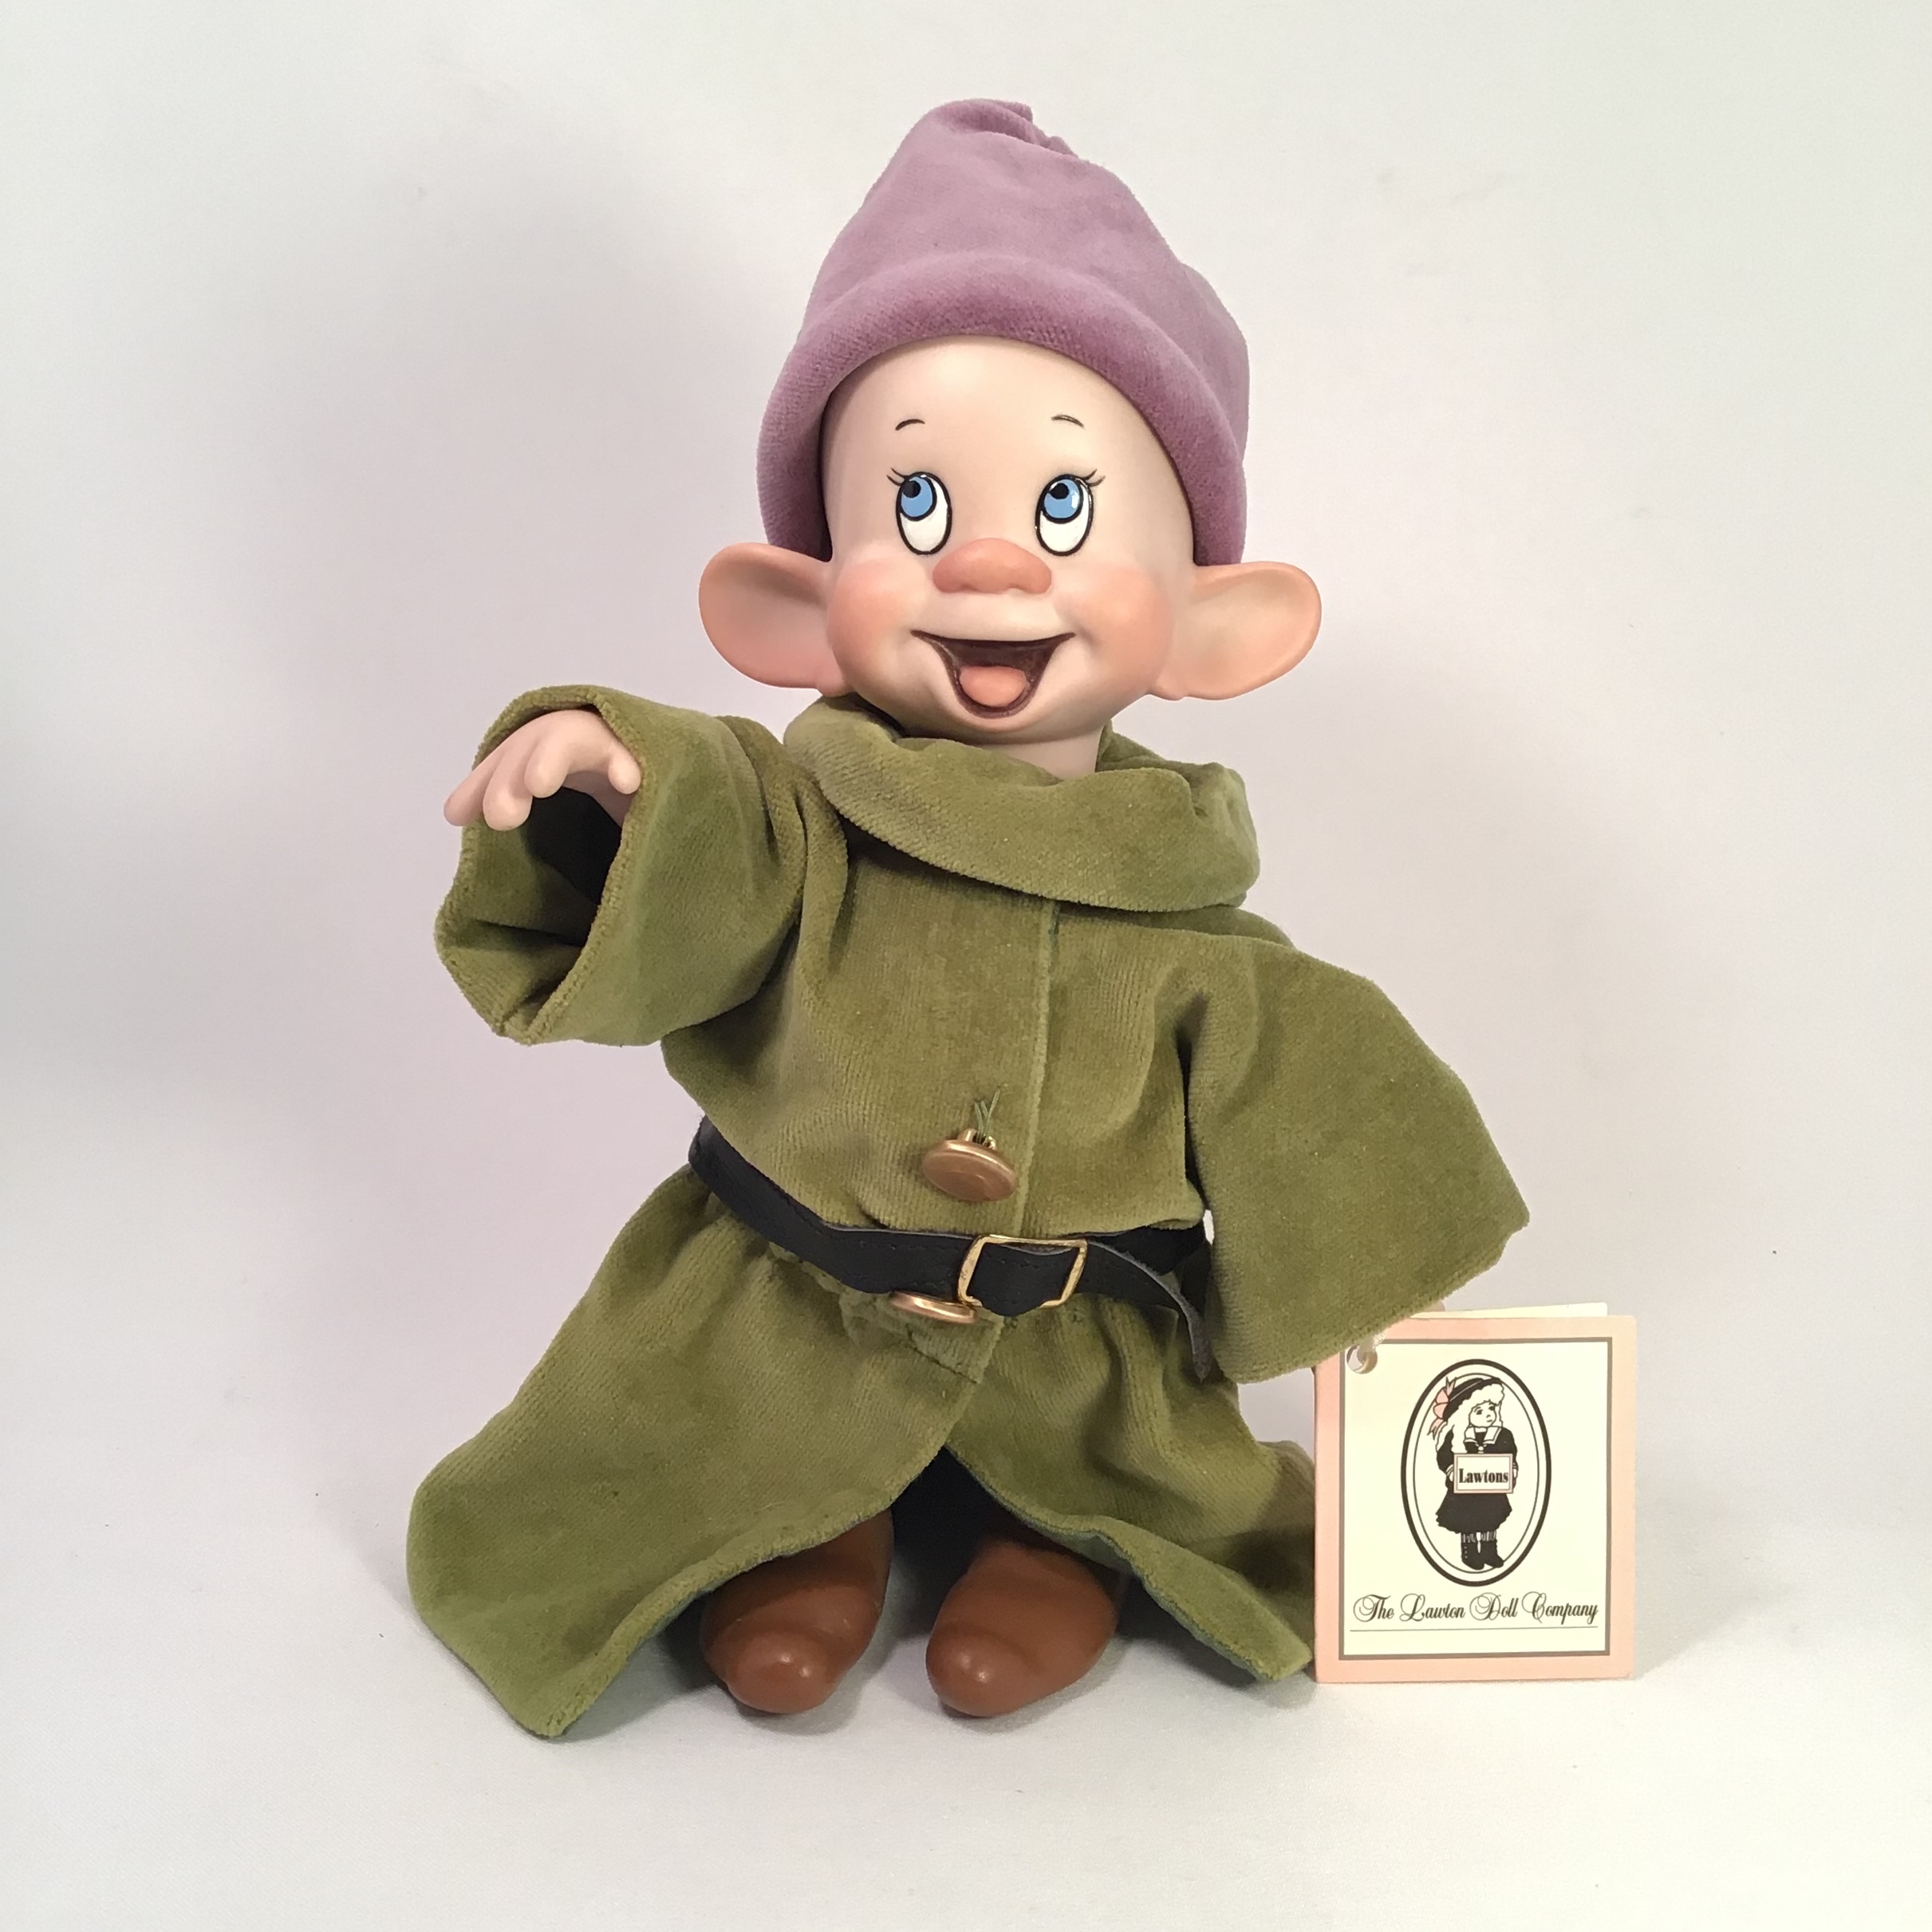 Wendy Lawton Limited Edition Dopey Porcelain Doll Walt Disney Snow White and the Seven Dwarfs